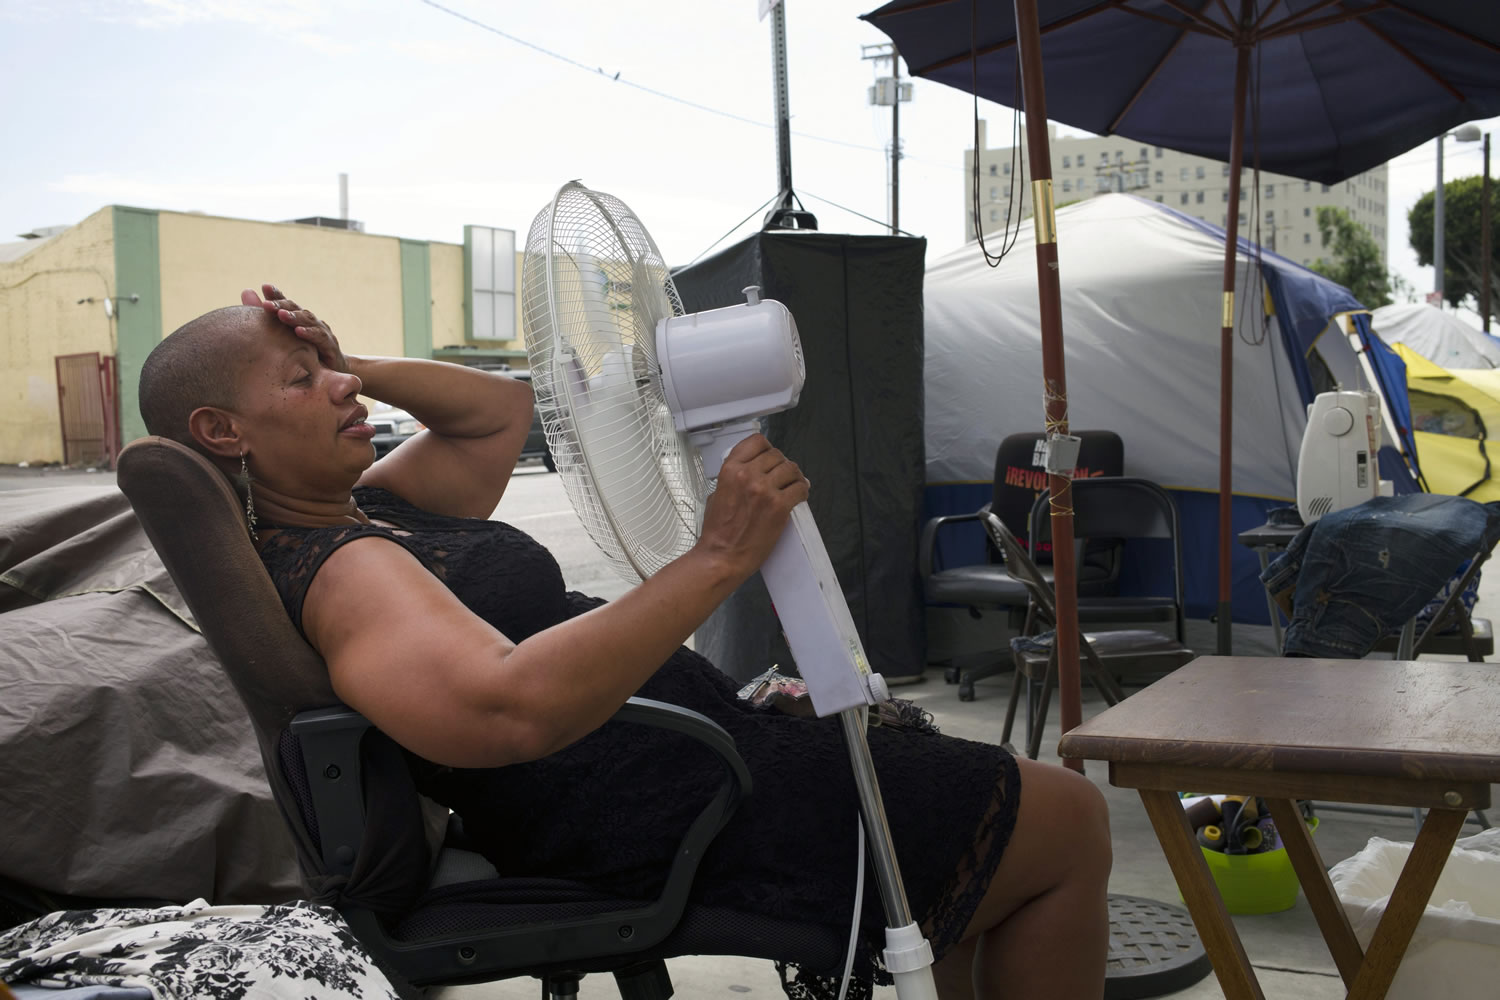 Stephanie Williams, 53, cools off using a fan running on a portable battery, Thursday, Sept. 10, 2015, in the Skid Row area of Los Angeles. Much of California simmered in a stew of high heat and humidity on Thursday, bracing for more thunderstorms and flash floods that have already killed one person and left scattered damage and power outages. (AP Photo/Jae C.